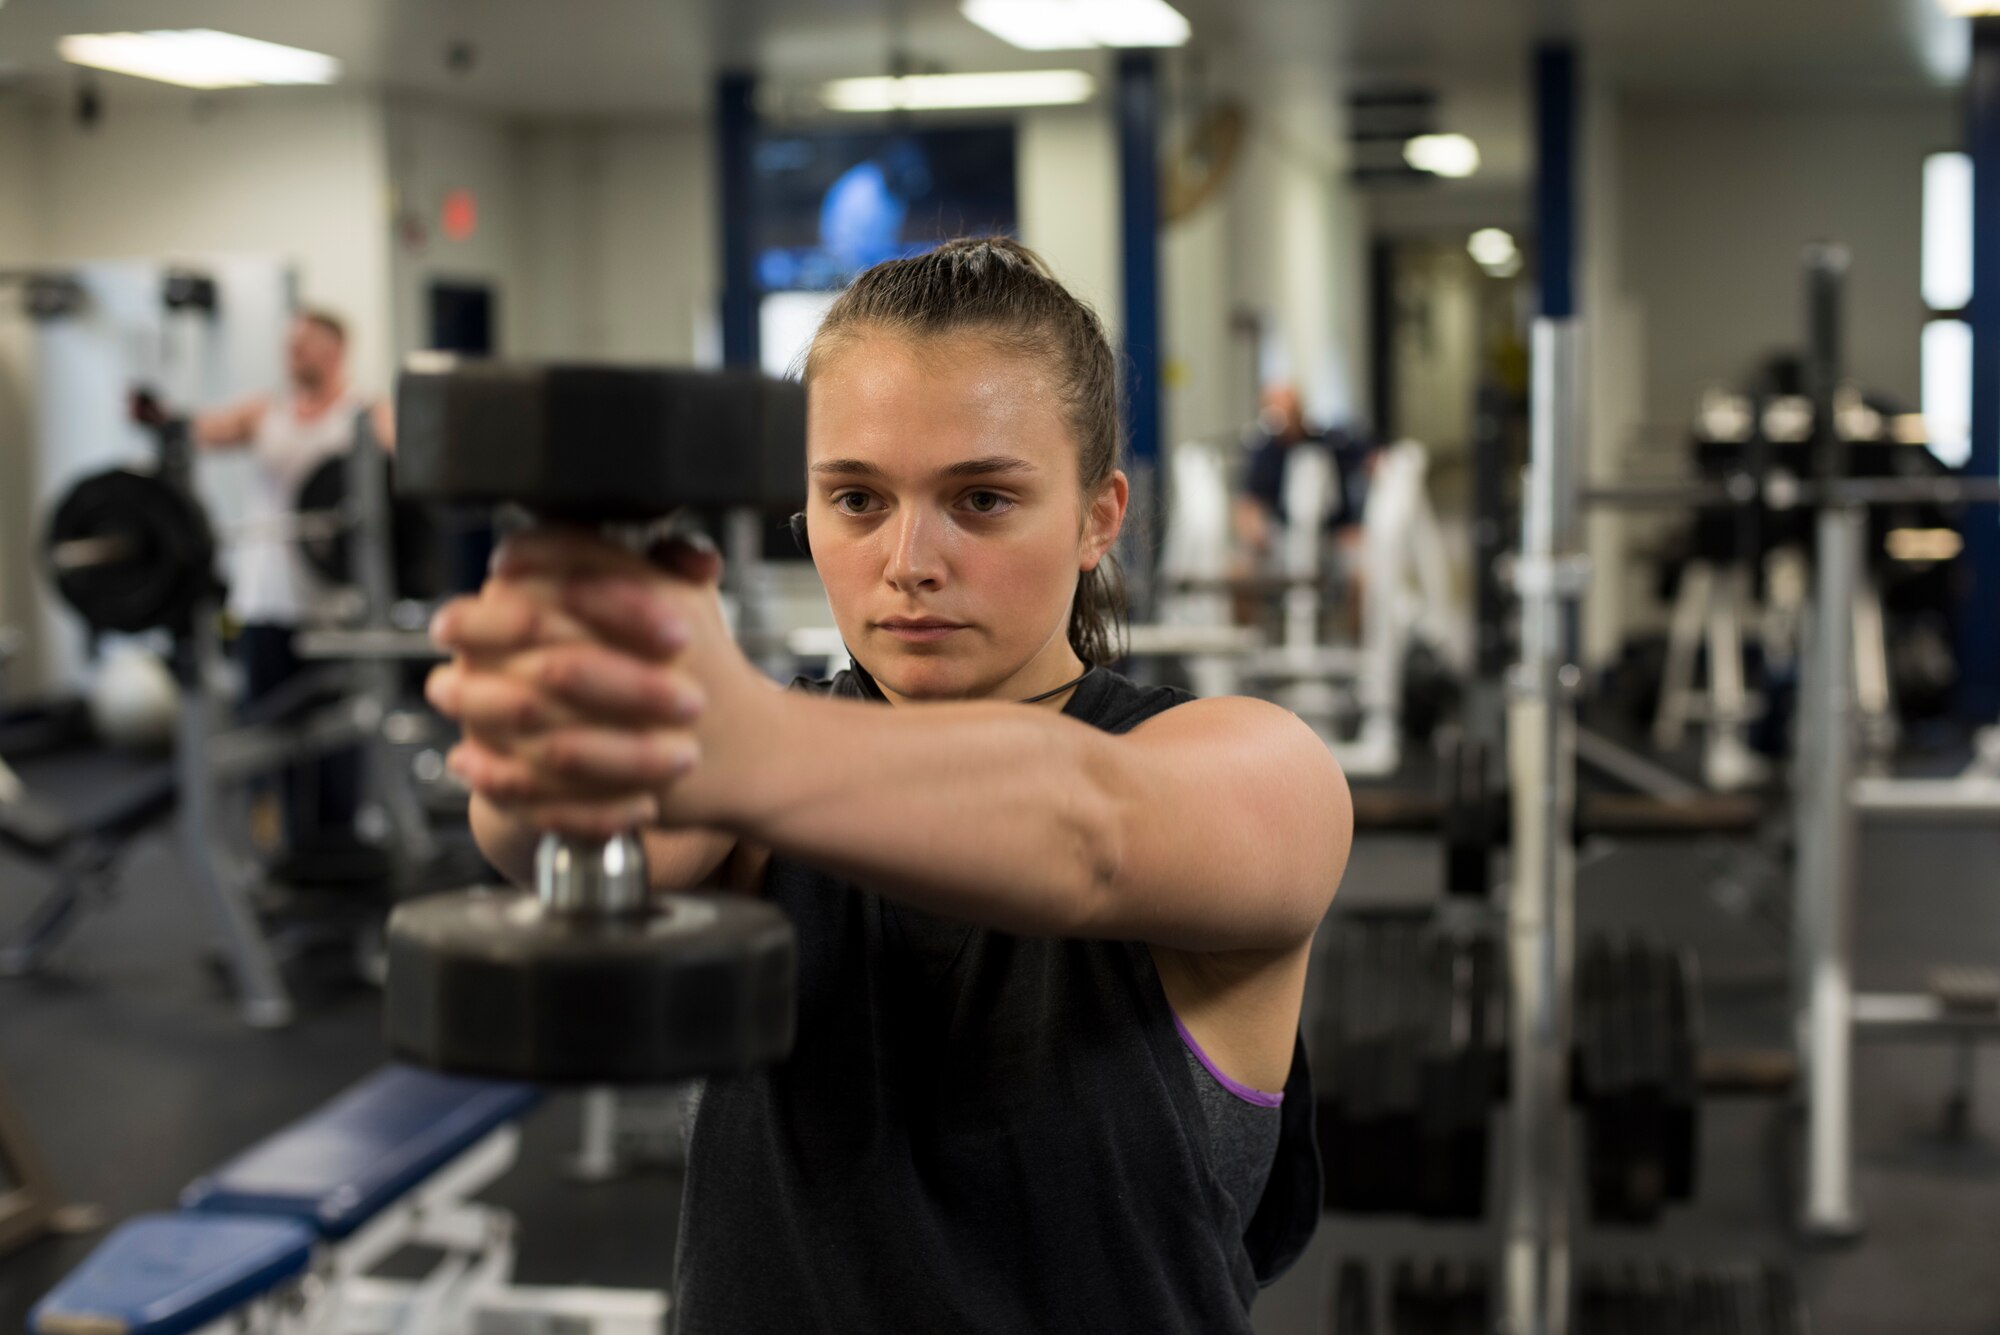 U.S. Air Force Senior Airman Sidnea Bailey, a 35th Operations Support Squadron aircrew flight equipment journeyman, holds a dumbbell at Potter Fitness Center, at Misawa Air Base, Japan, Aug. 11, 2019. In her adolescents Bailey used determination and drive to lose 40 pounds in 3 months by running 2 miles and performing 200 sit-ups a day, enhancing her stamina, flexibility and self-esteem. (U.S. Air Force photo by Senior Airman Collette Brooks)